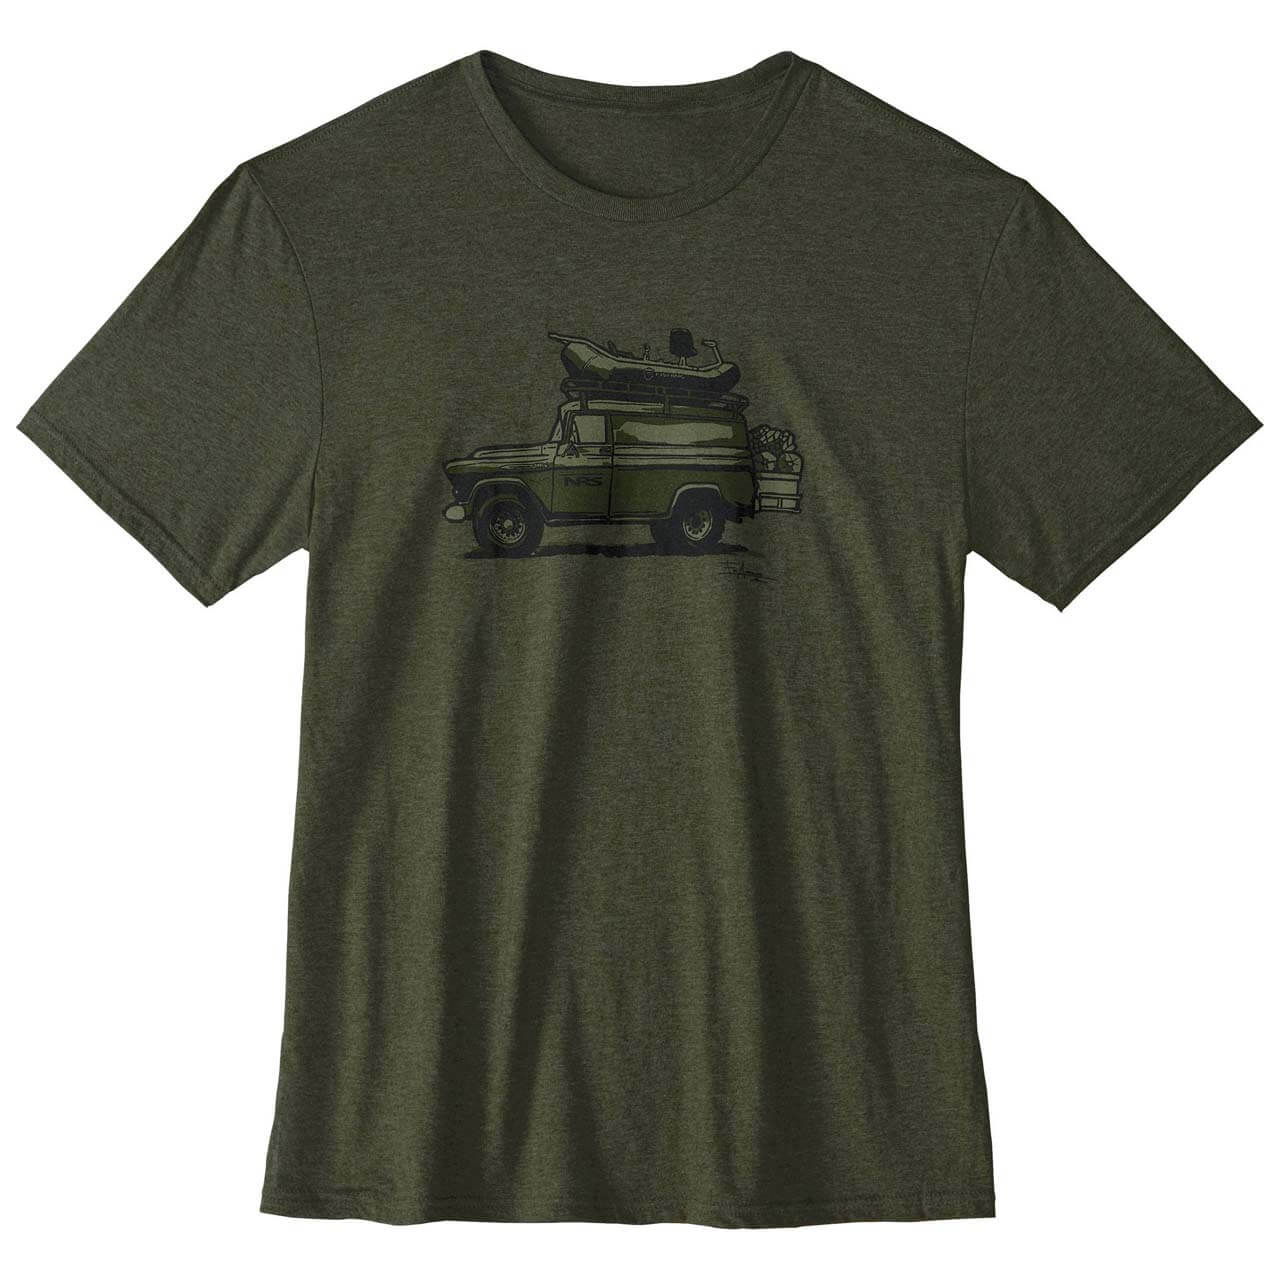 NRS Rigged Out T-Shirt - Heathered Olive, L